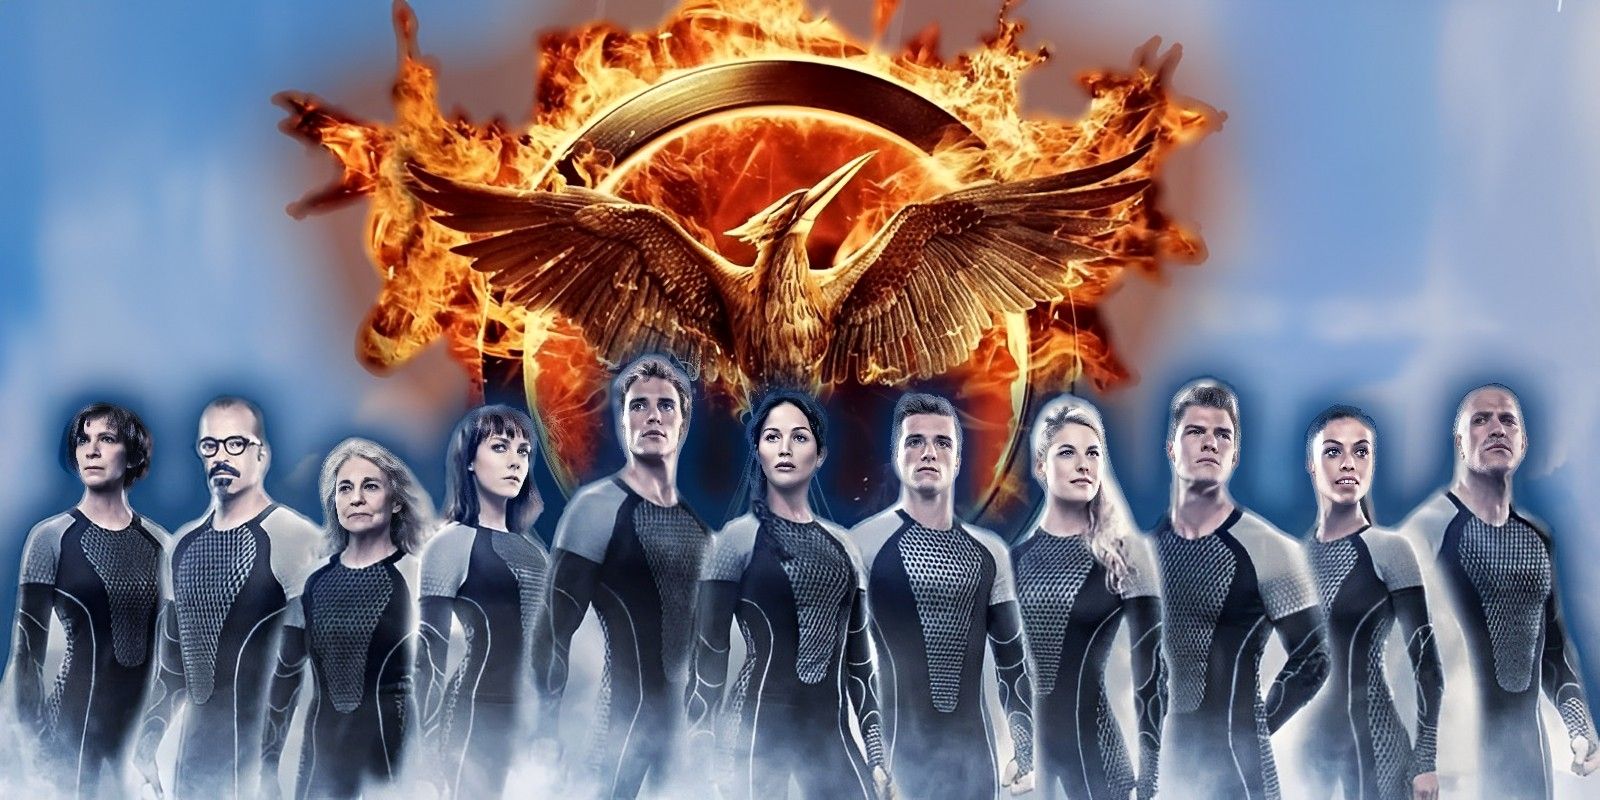 The Hunger Games victors reunited for the 75th Games in front of a Mockingjay